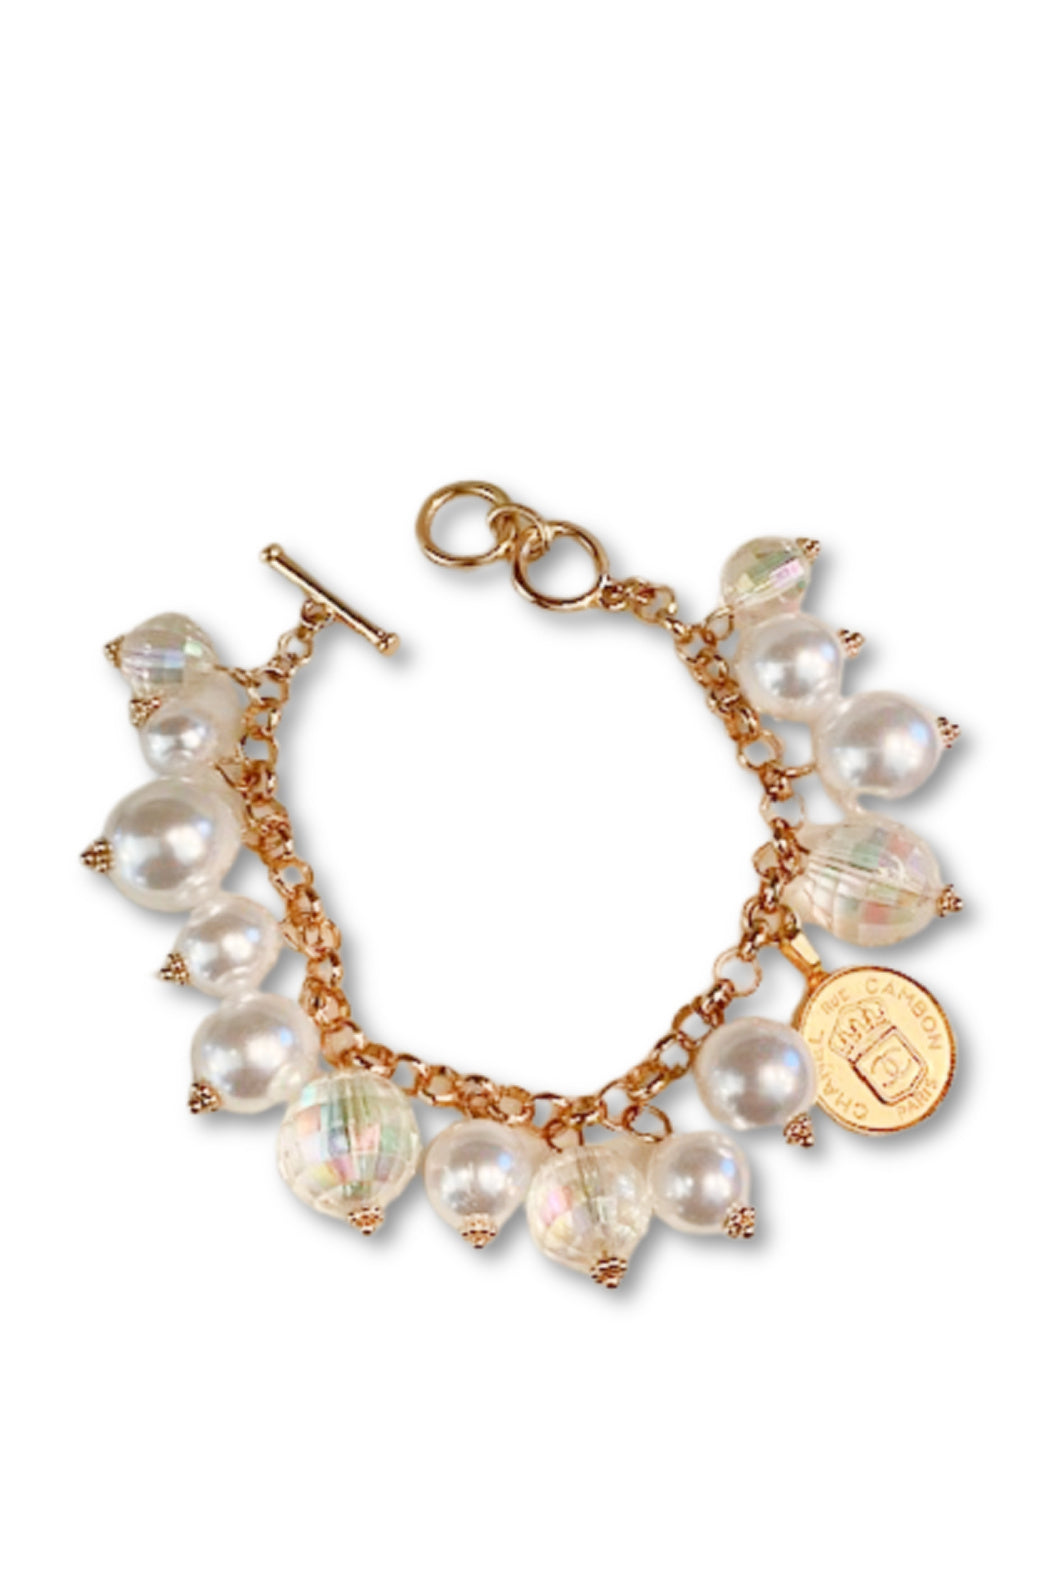 Pearl and Crystal Chanel Button Charm Bracelet